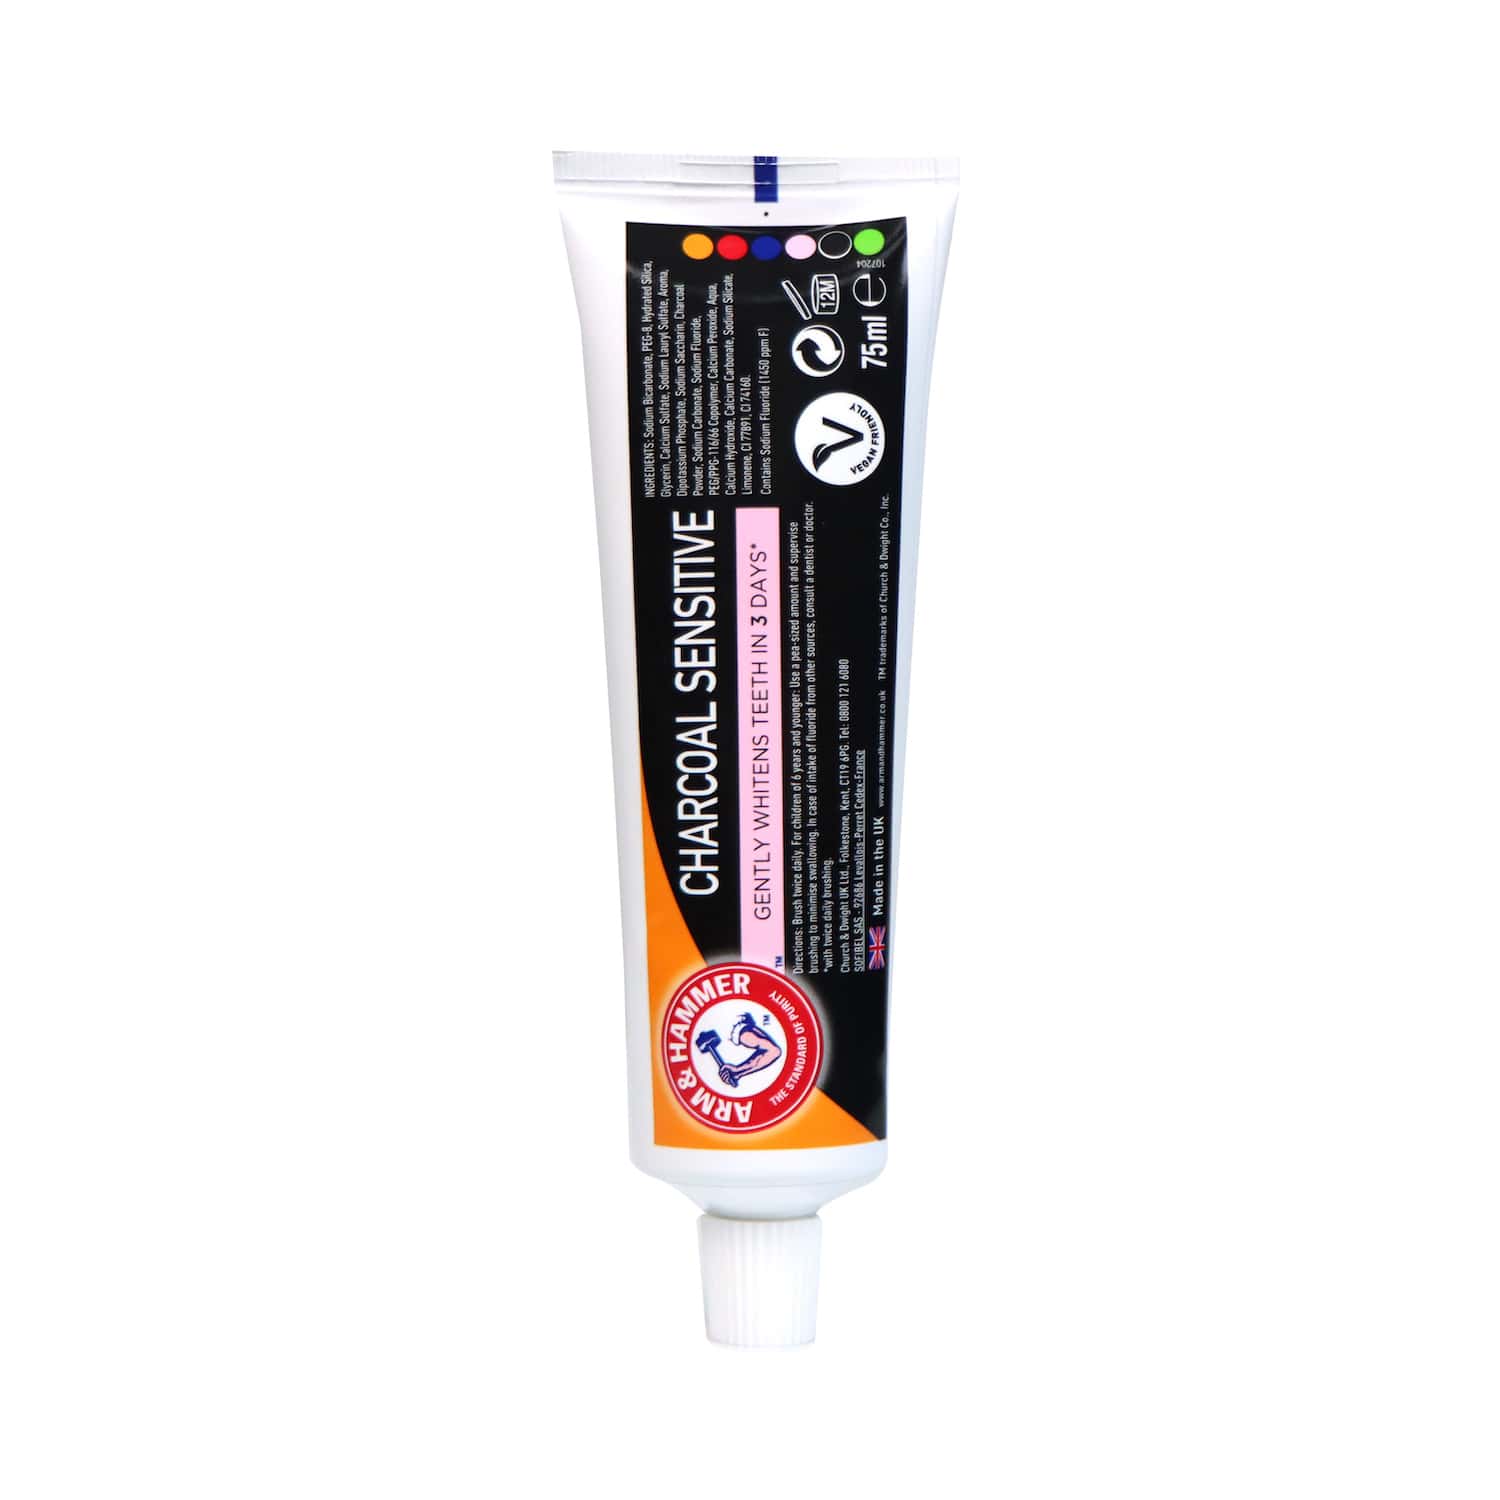 Arm & Hammer Charcoal Sensitive Toothpaste 75ml